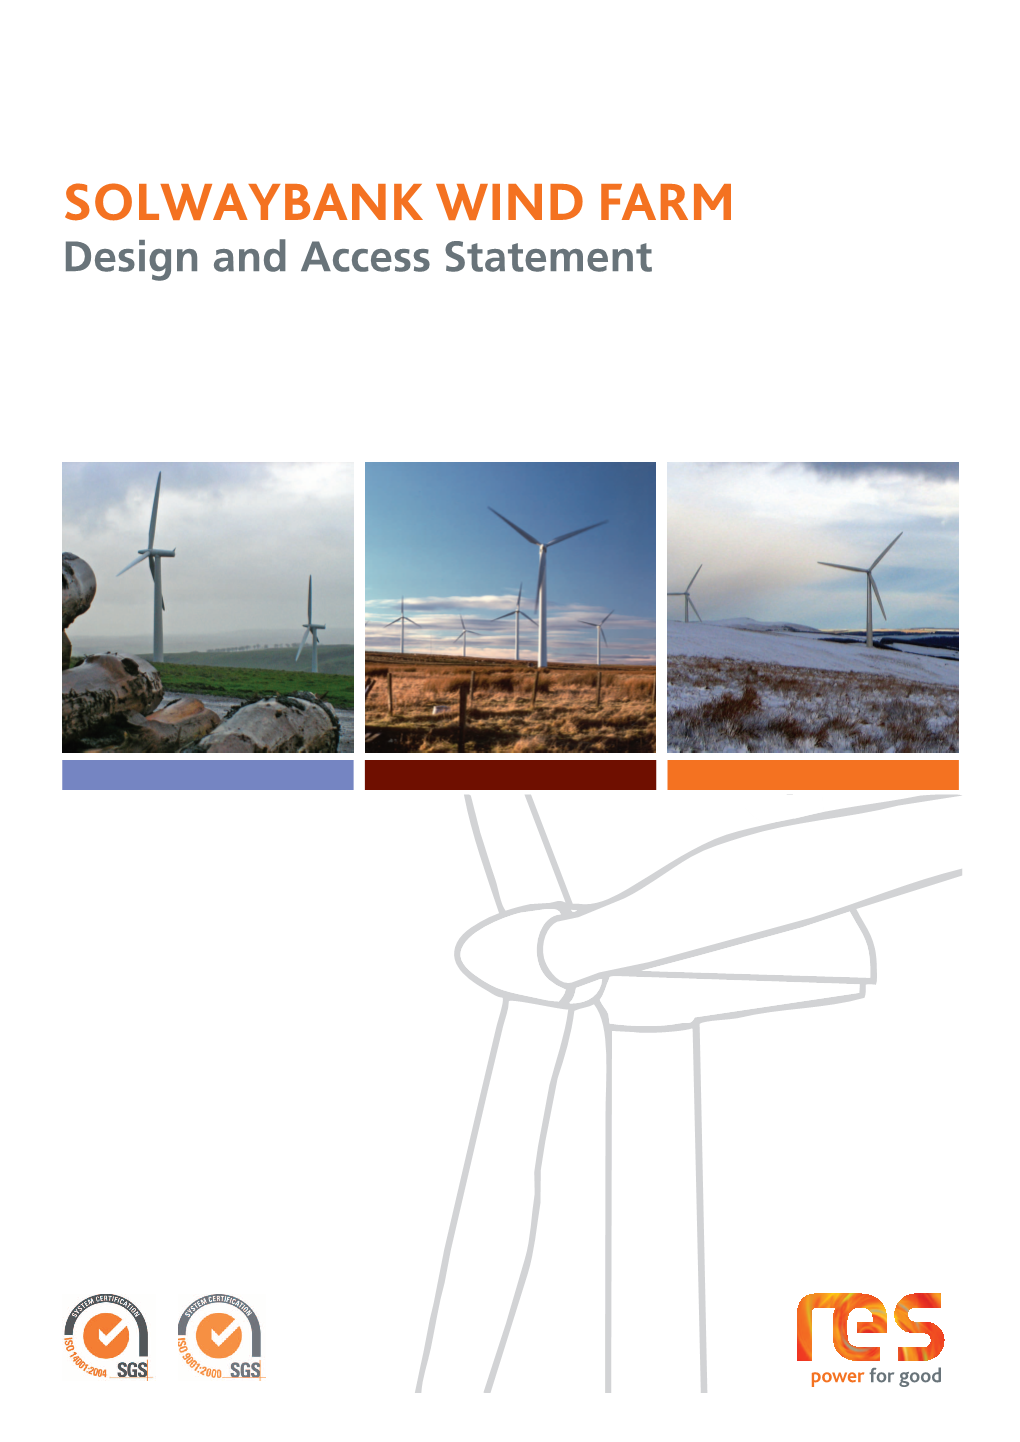 SOLWAYBANK Wind Farm Design and Access Statement